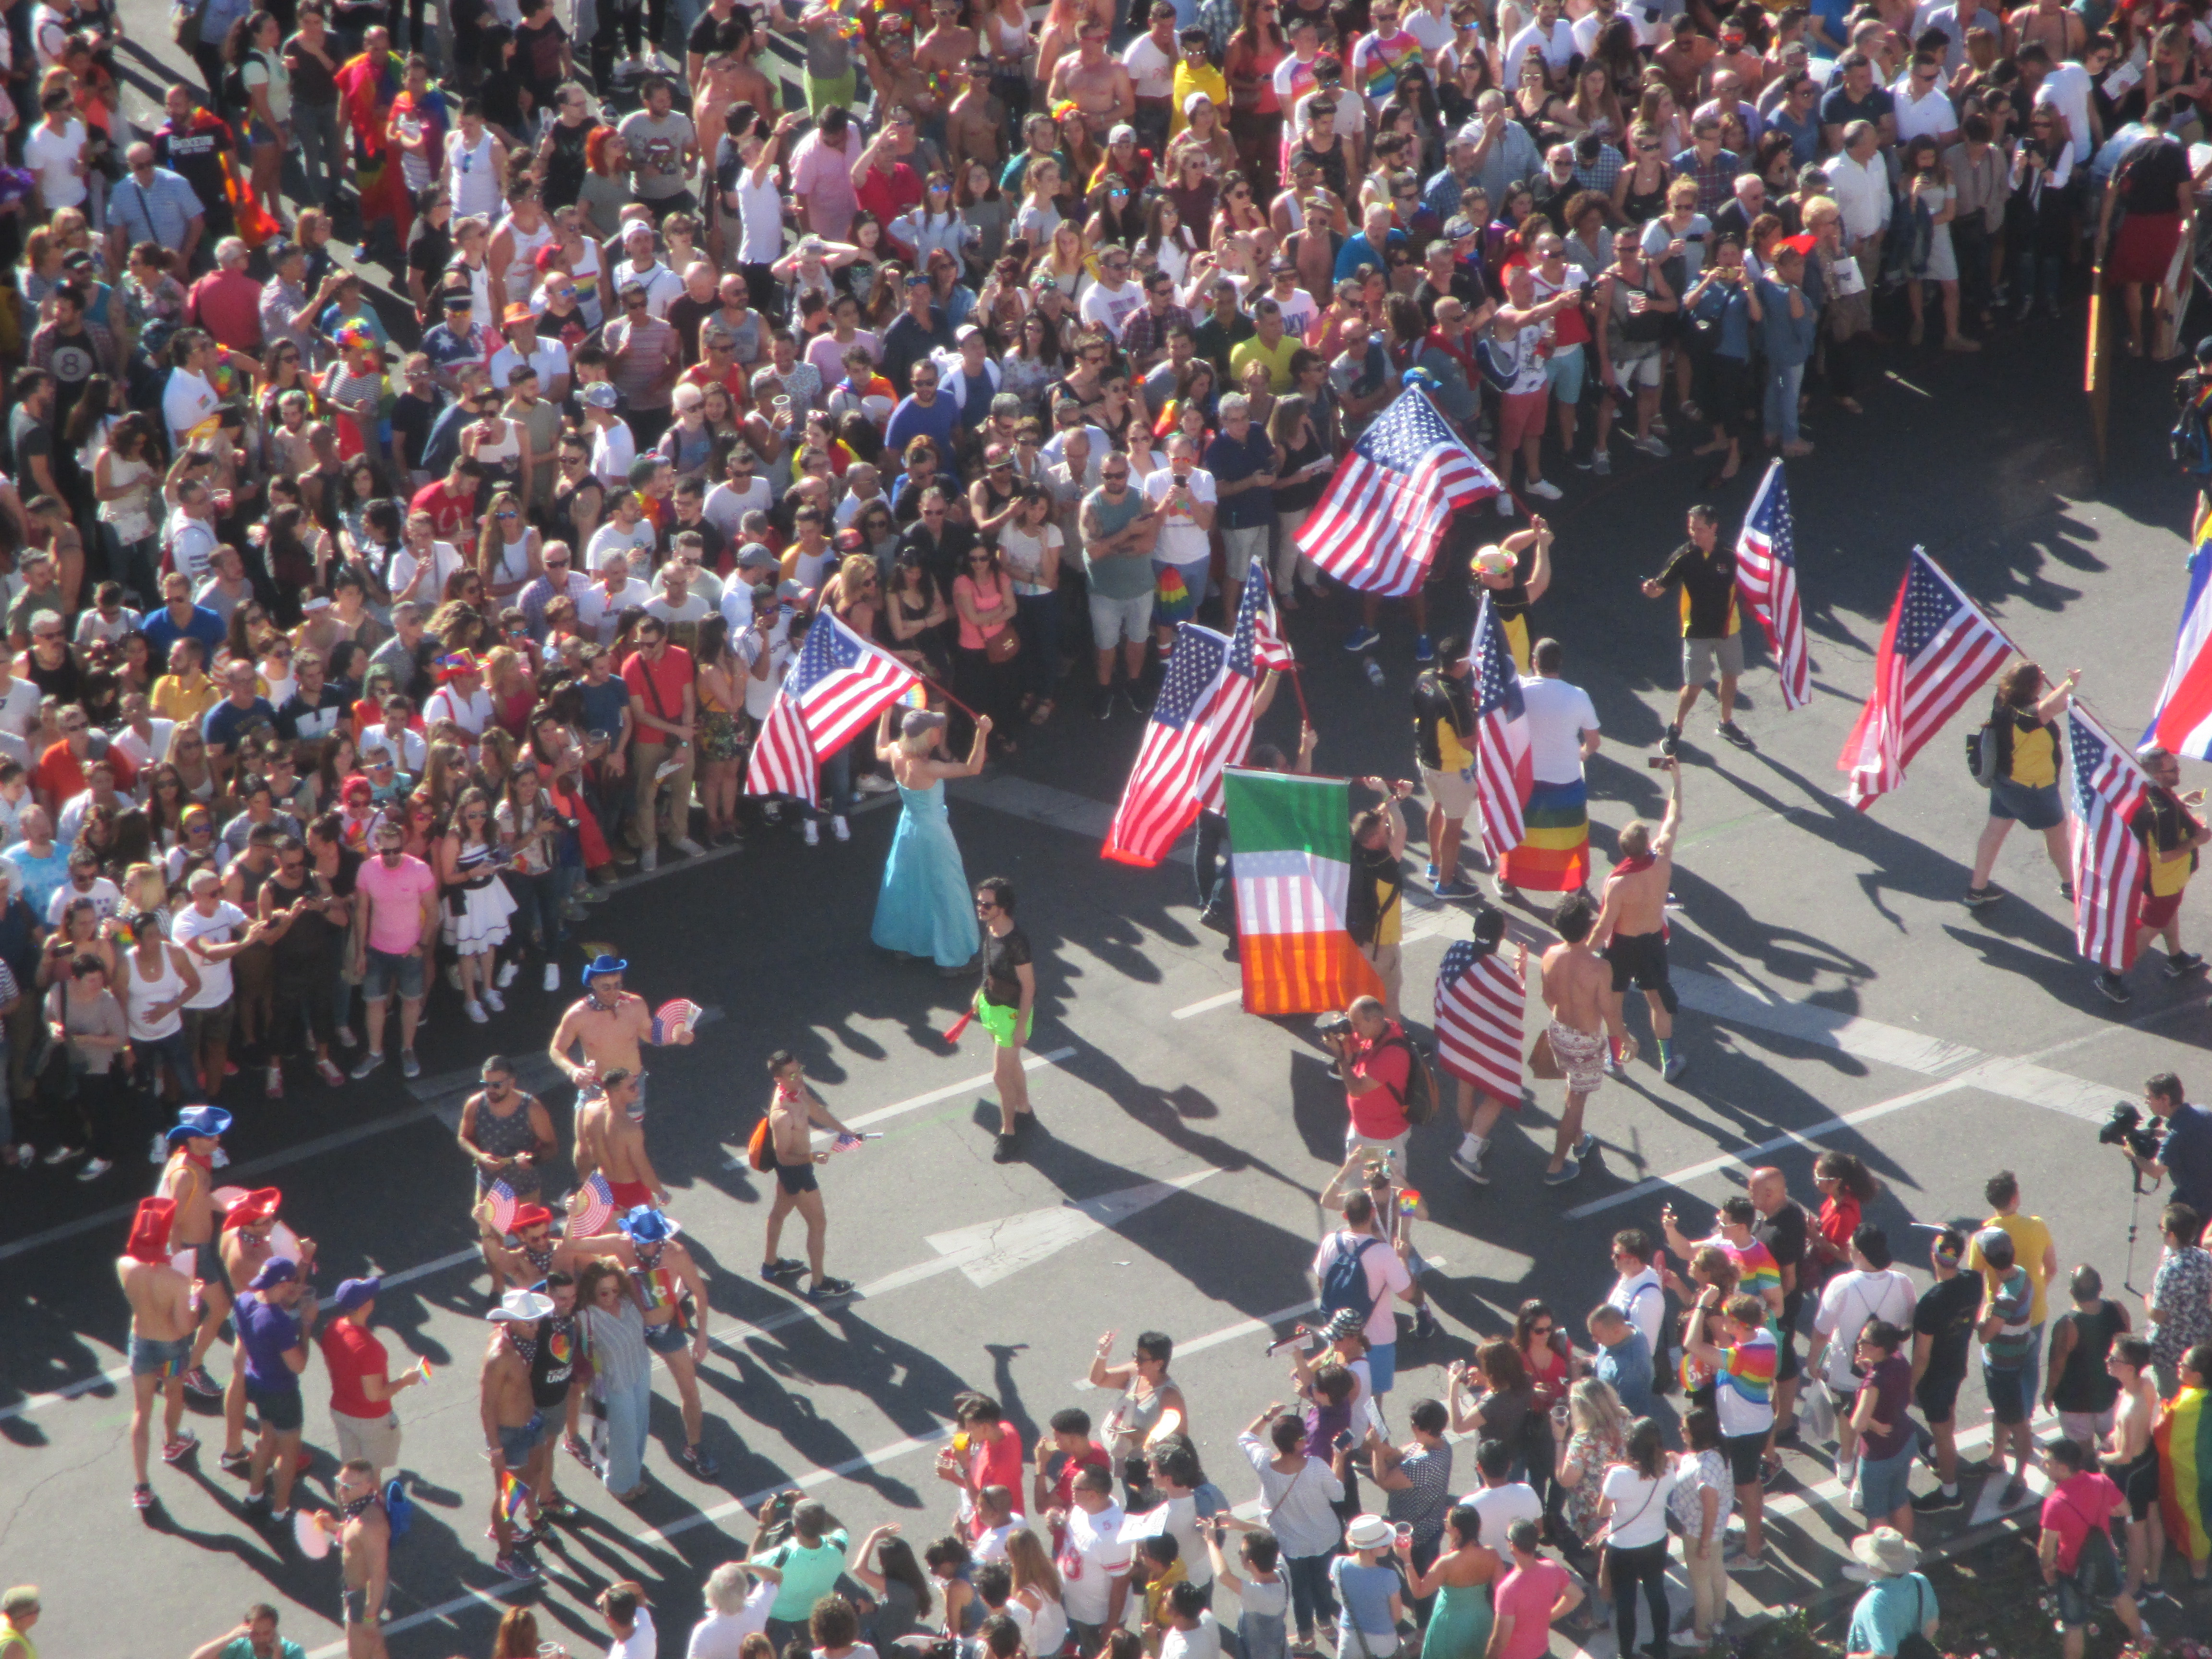 Contingent with American flags, some with American flags on one side and the flags from other countries, including Ireland, on the other side.